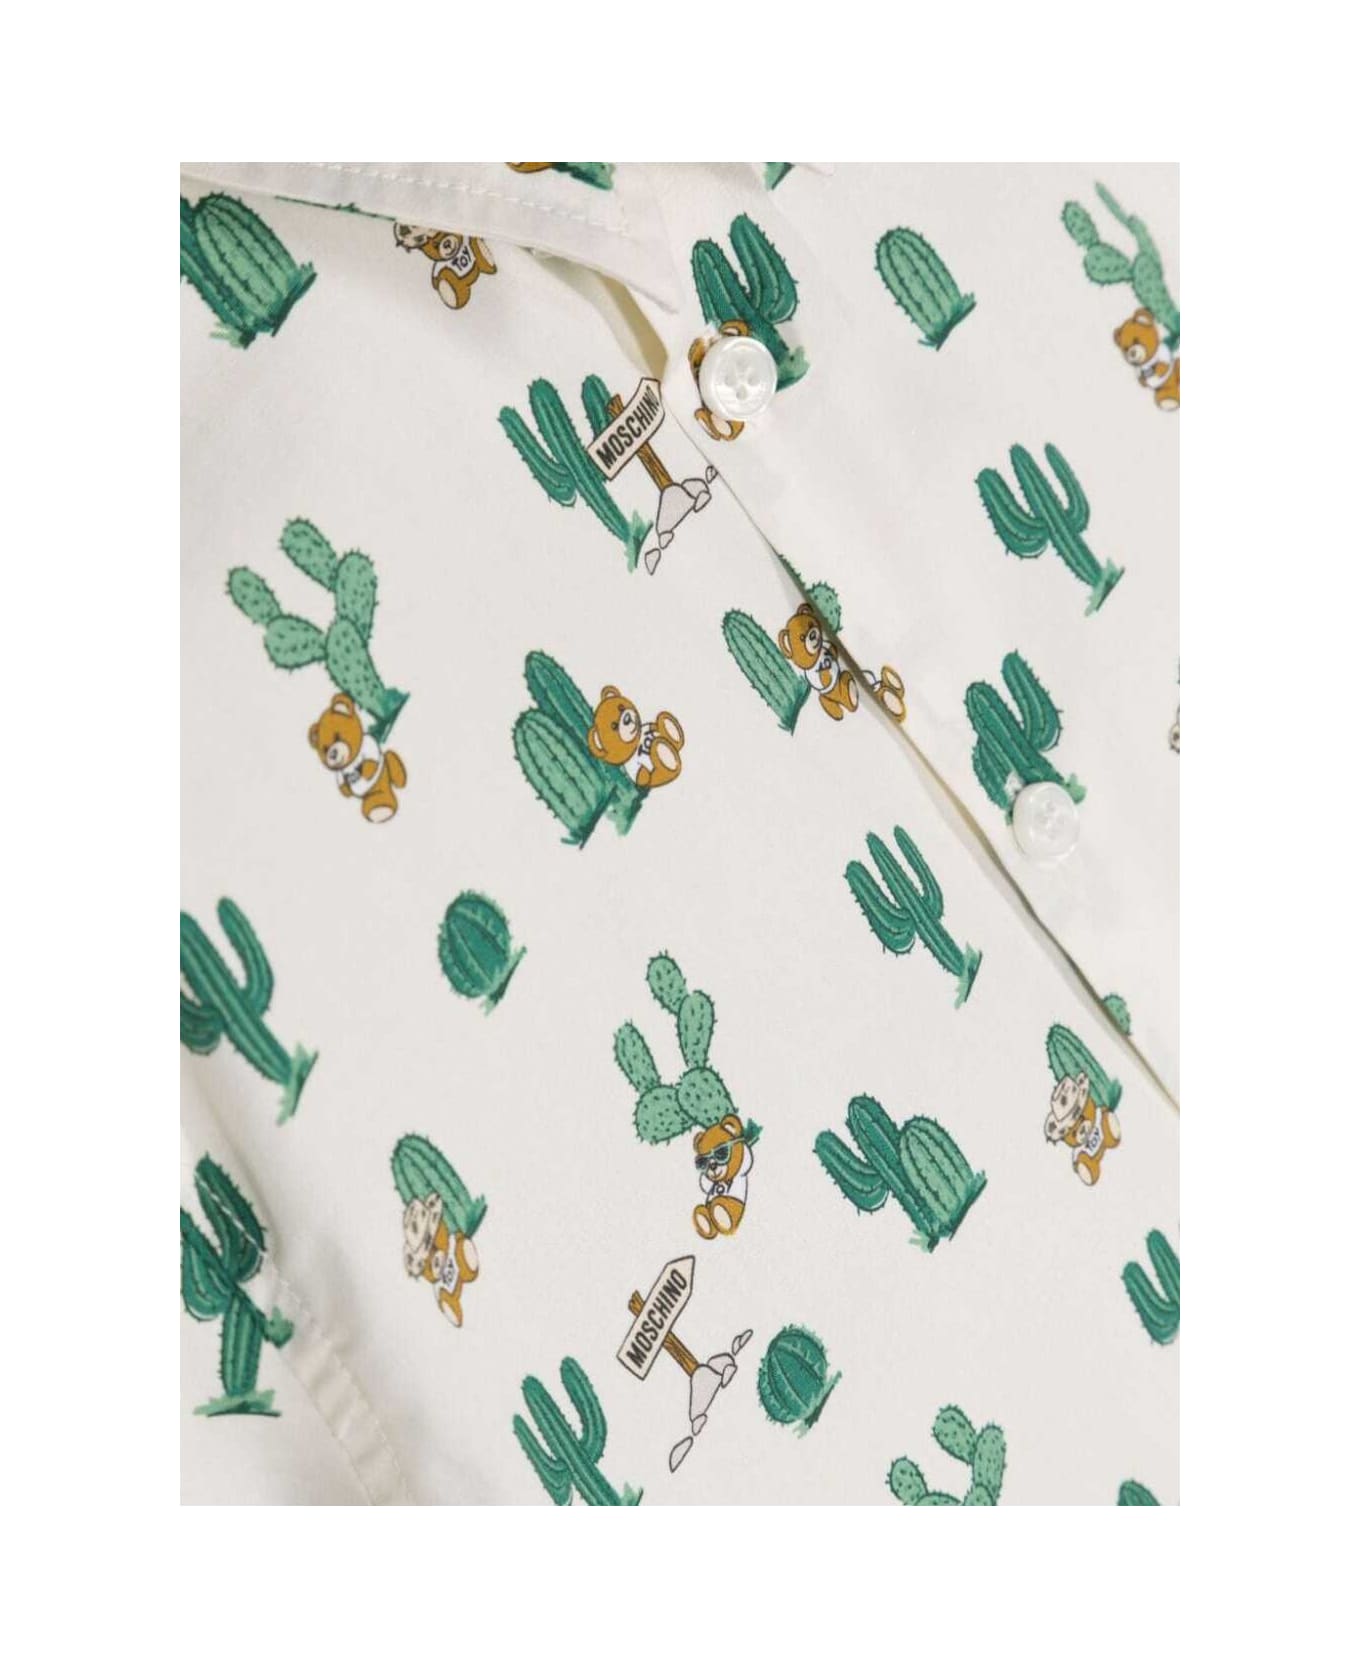 Moschino White Shirt With Cactus And Teddy Bear In Stretch Cotton Boy - White